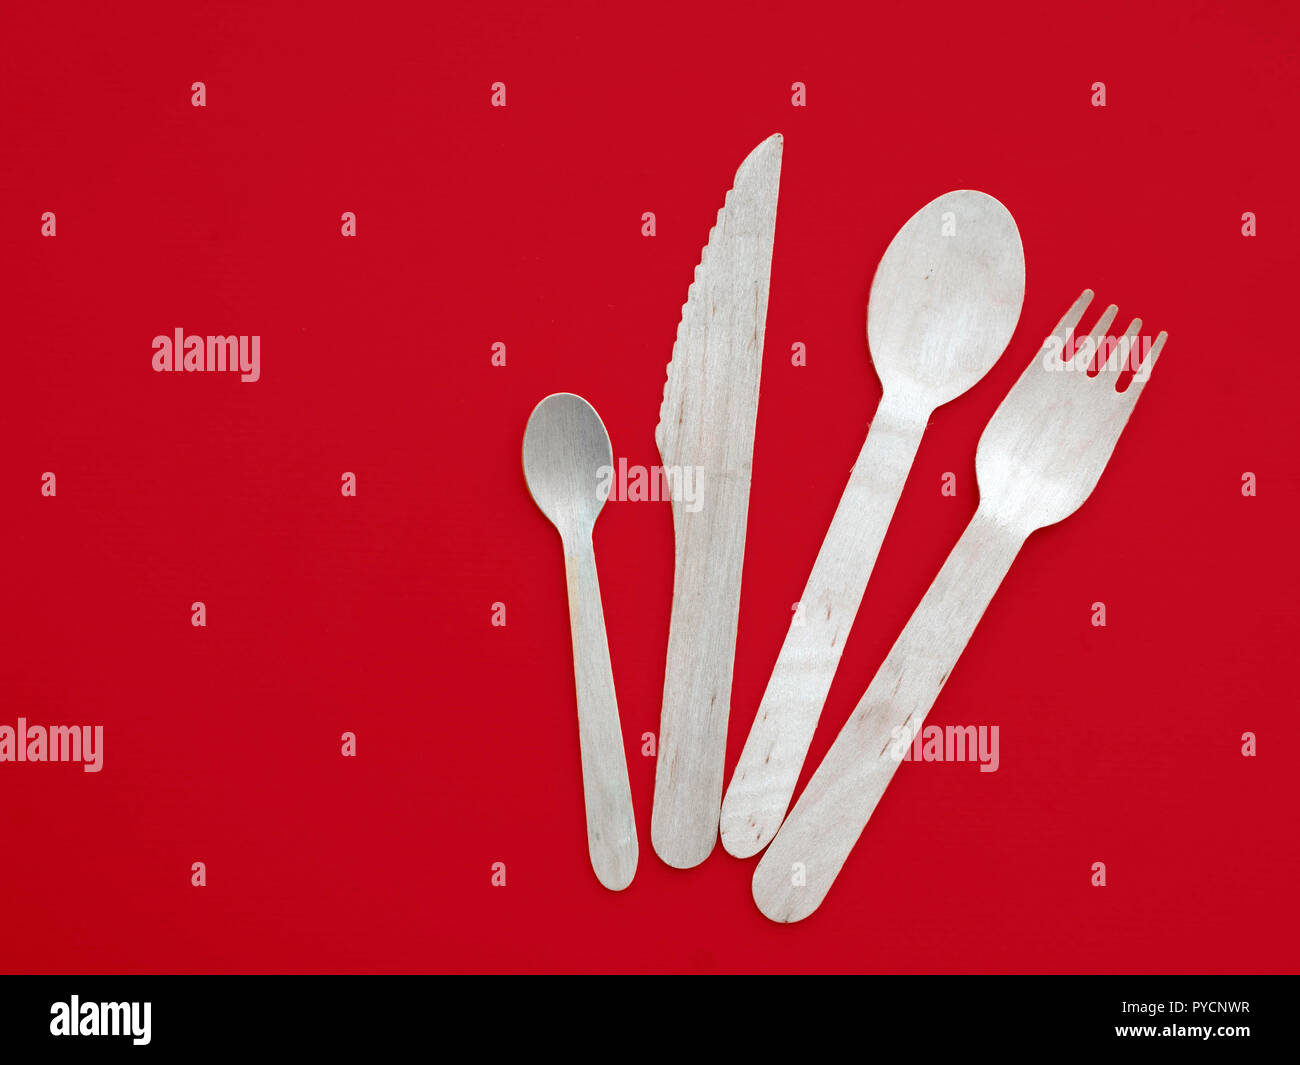 Wooden spoon, knife and fork isolated on white background. Eco friendly disposable cutlery on red. Stock Photo